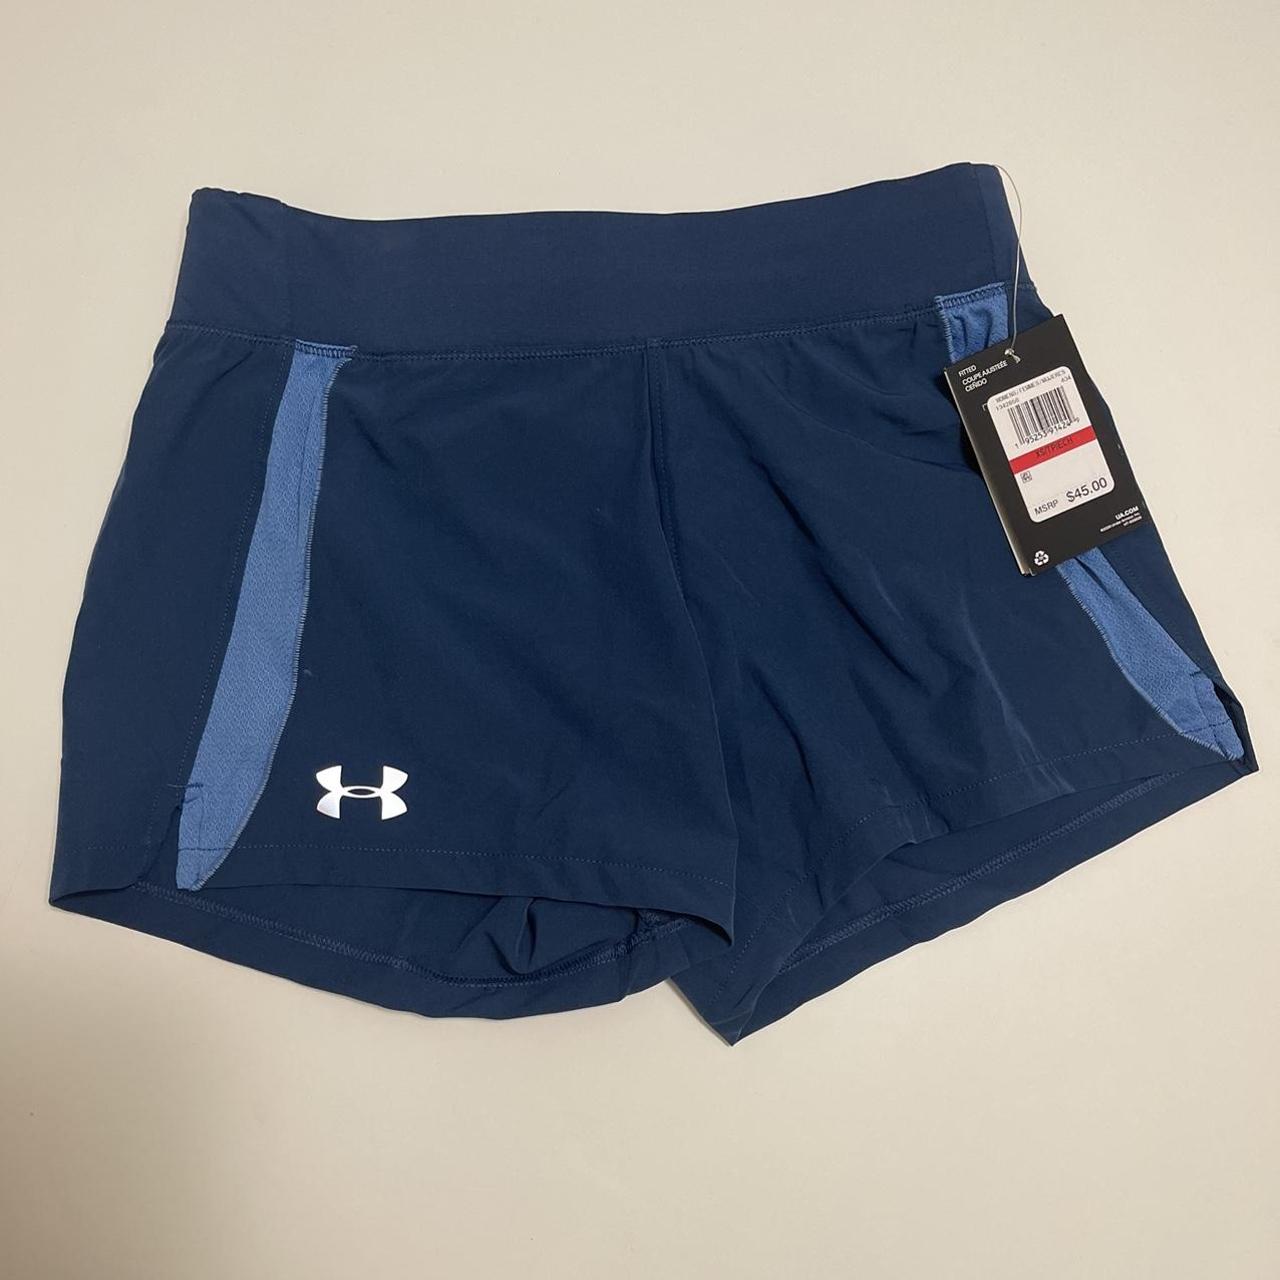 extra small Under Armour athletic shorts - Depop